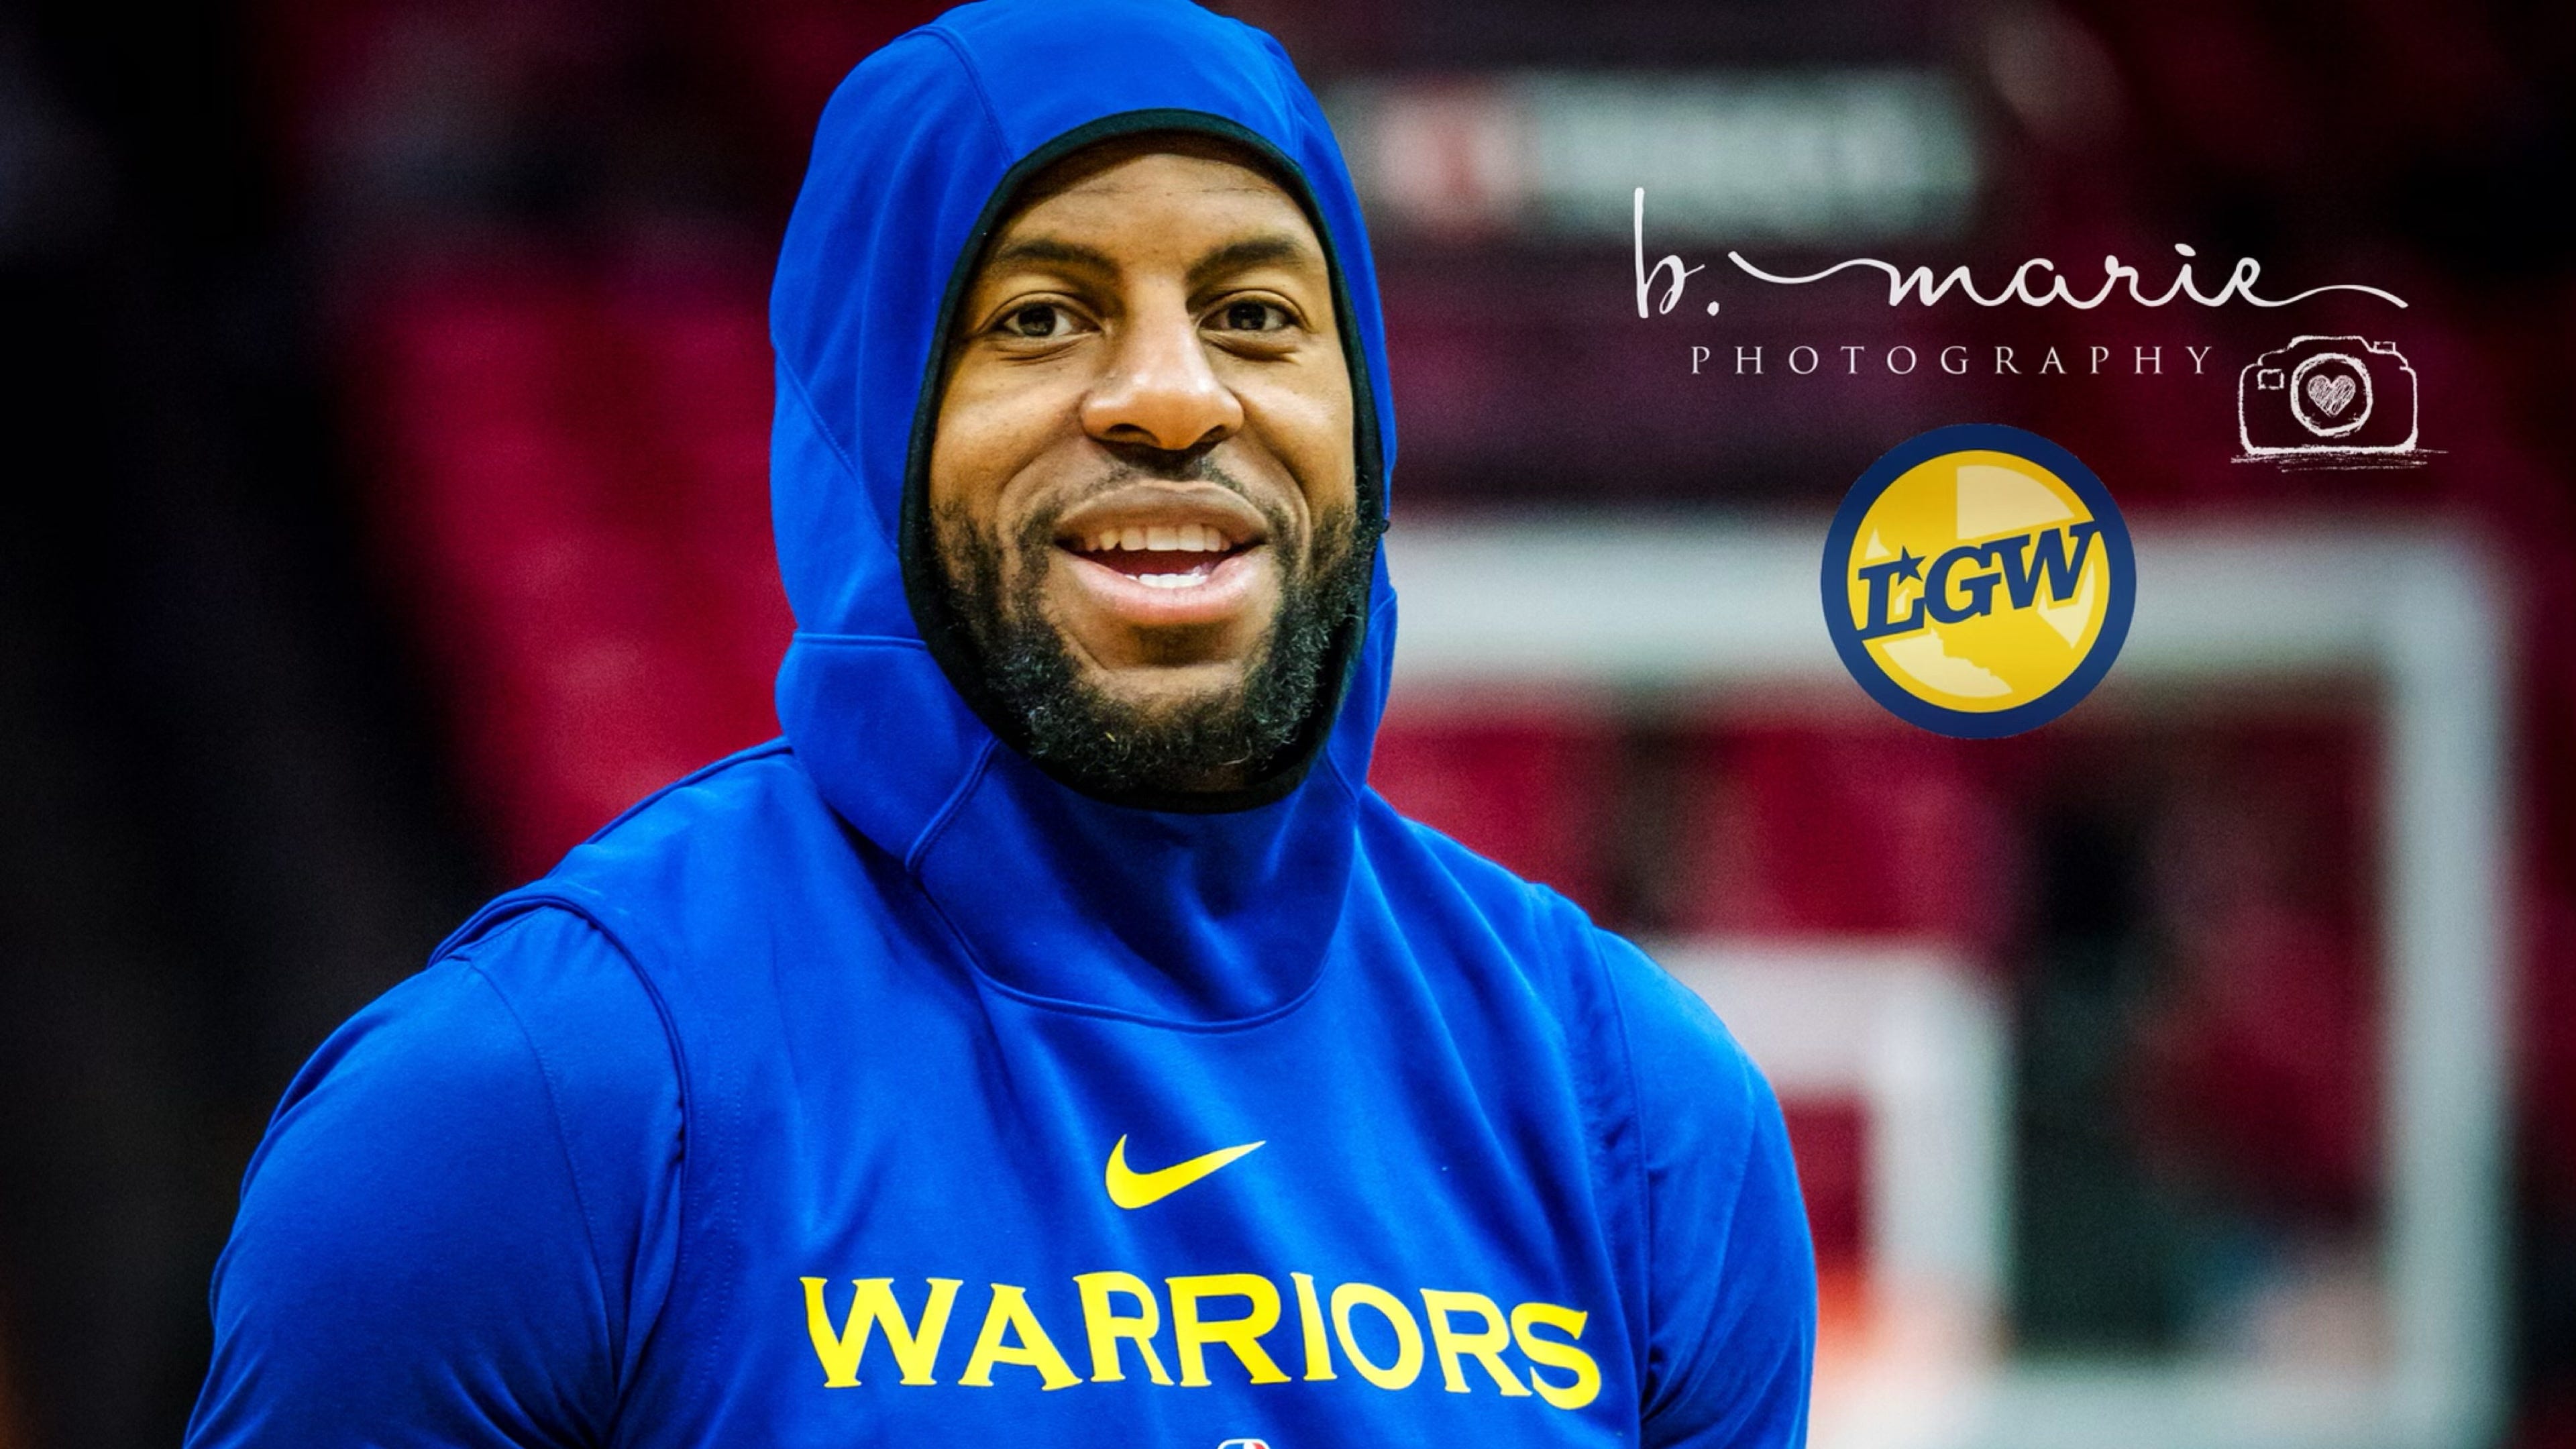 Iguodala's son nearly cried when told his dad might leave Warriors